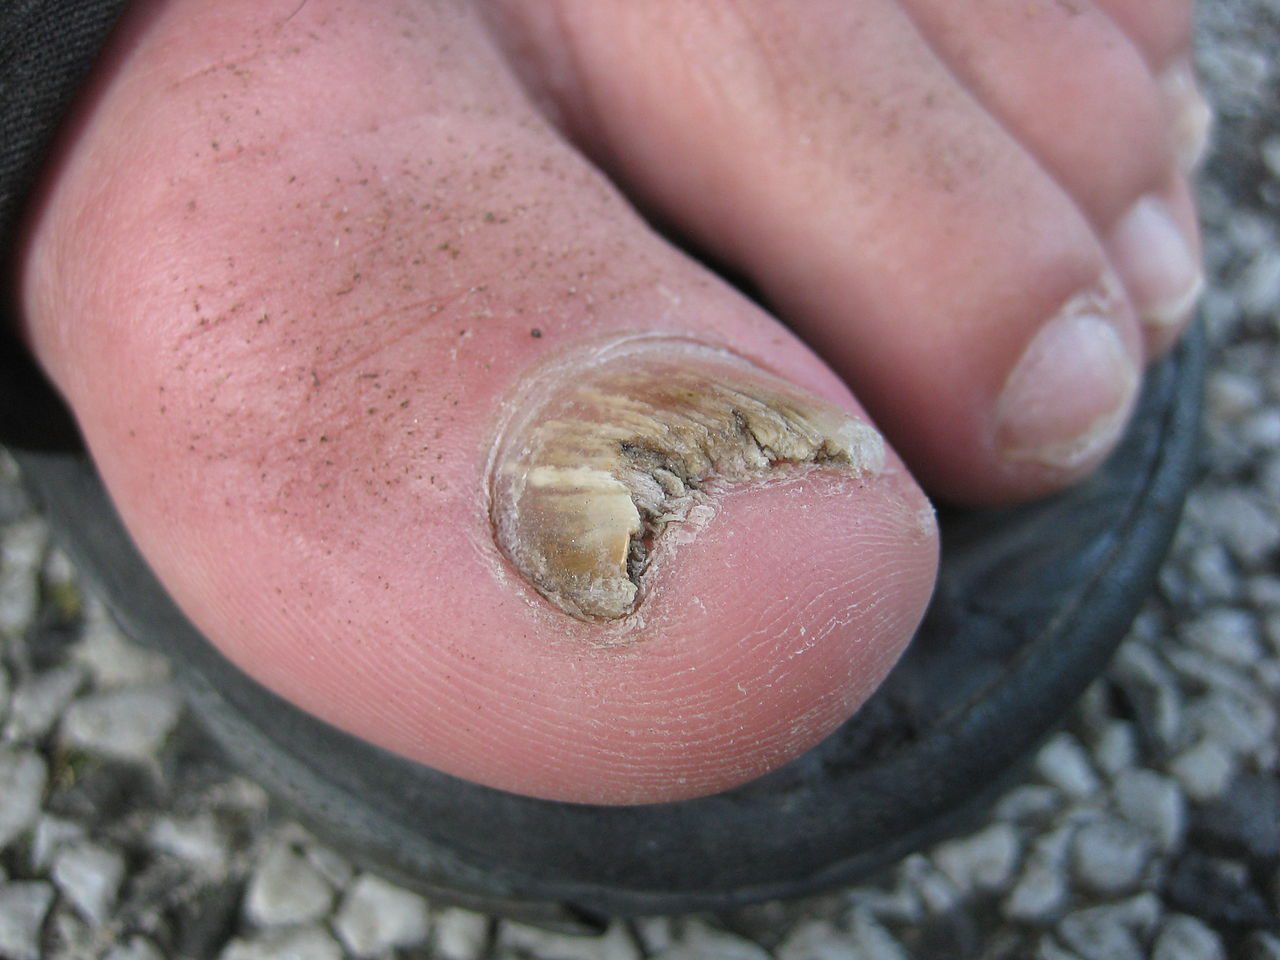 How to Get Rid of Toenail Fungus With Bleach? 2 Easy Ways